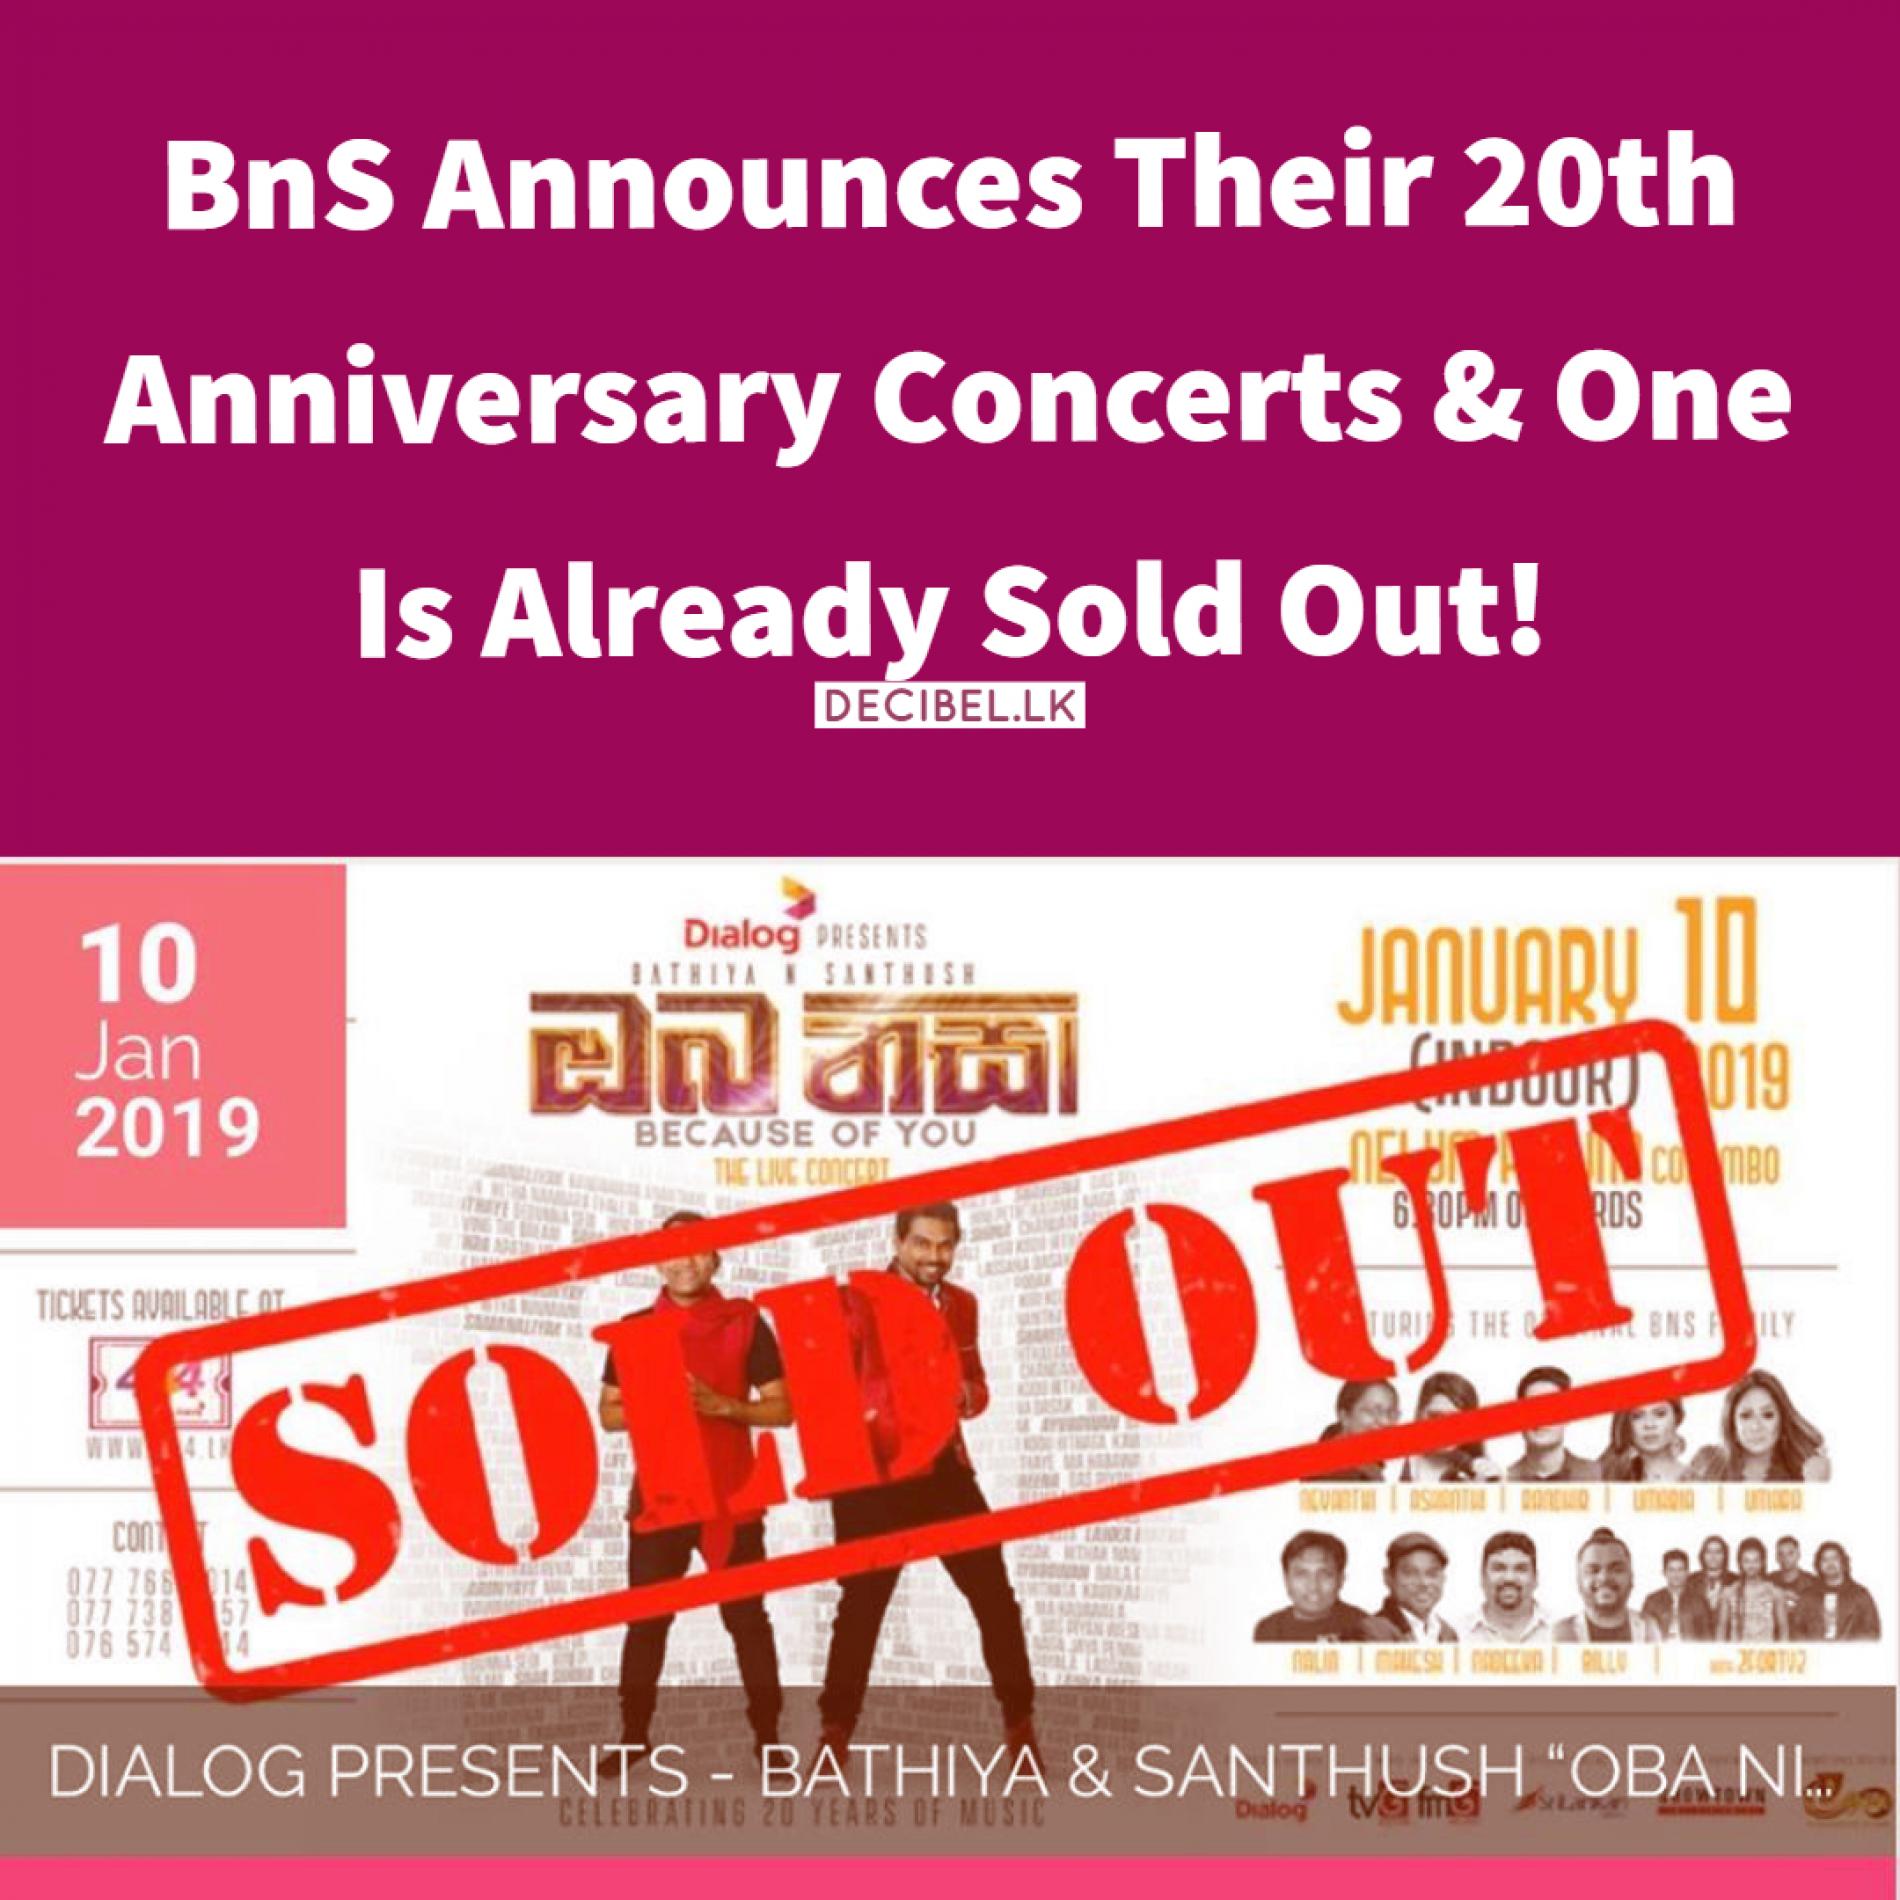 BnS Announces Their 20th Anniversary Concerts & One Is Already Sold Out!